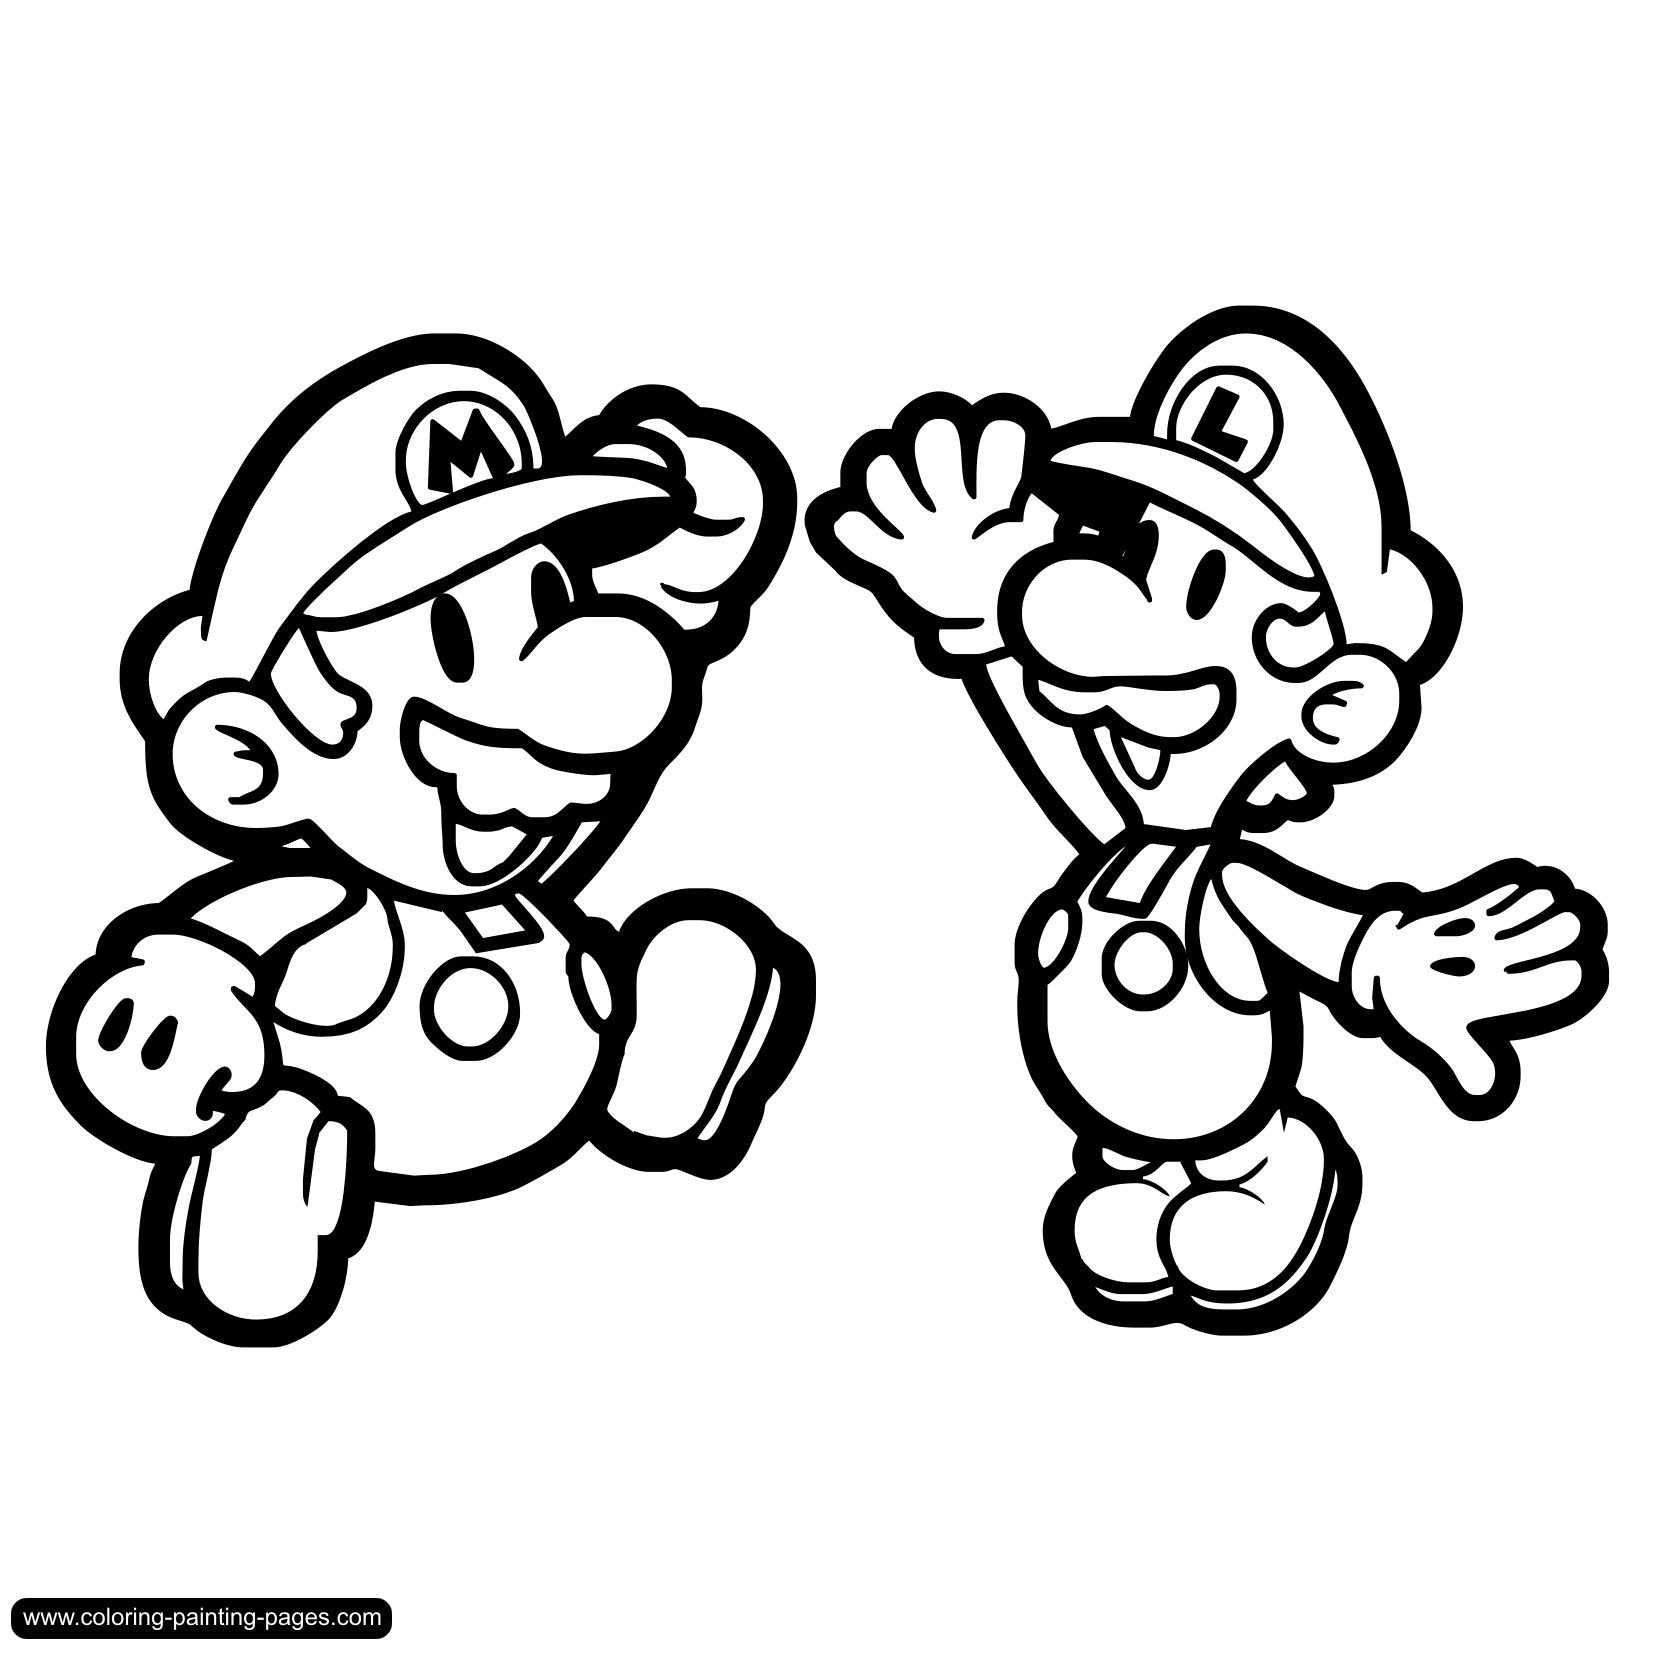 Mario Bros Coloring Page - Coloring Pages for Kids and for Adults